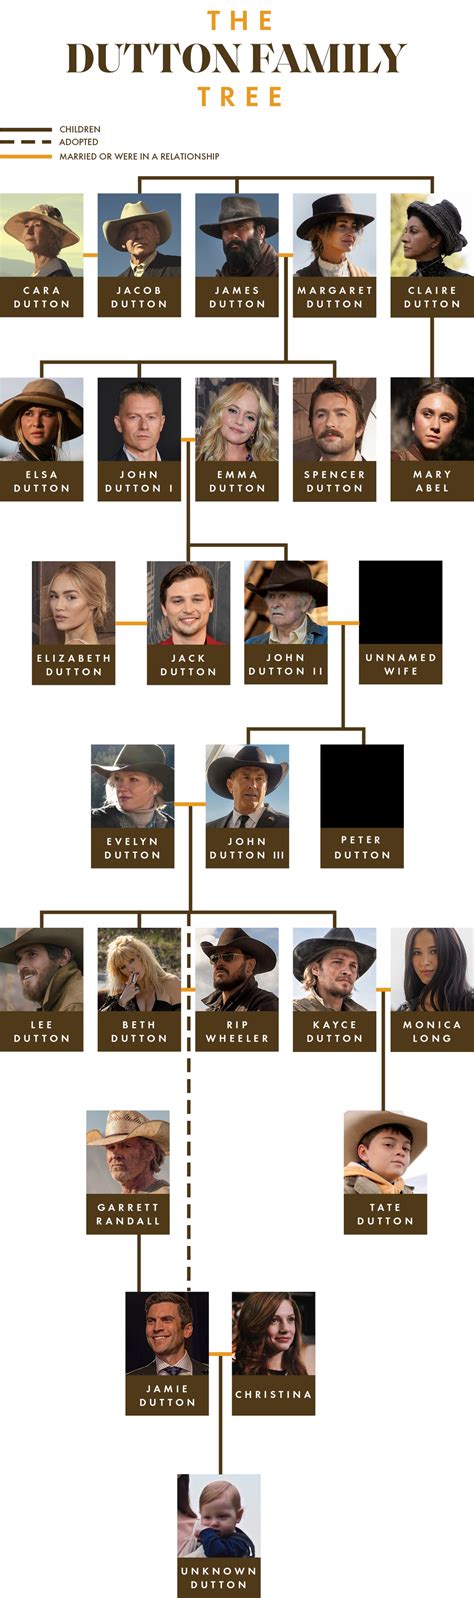 yellowstone family tree with pictures